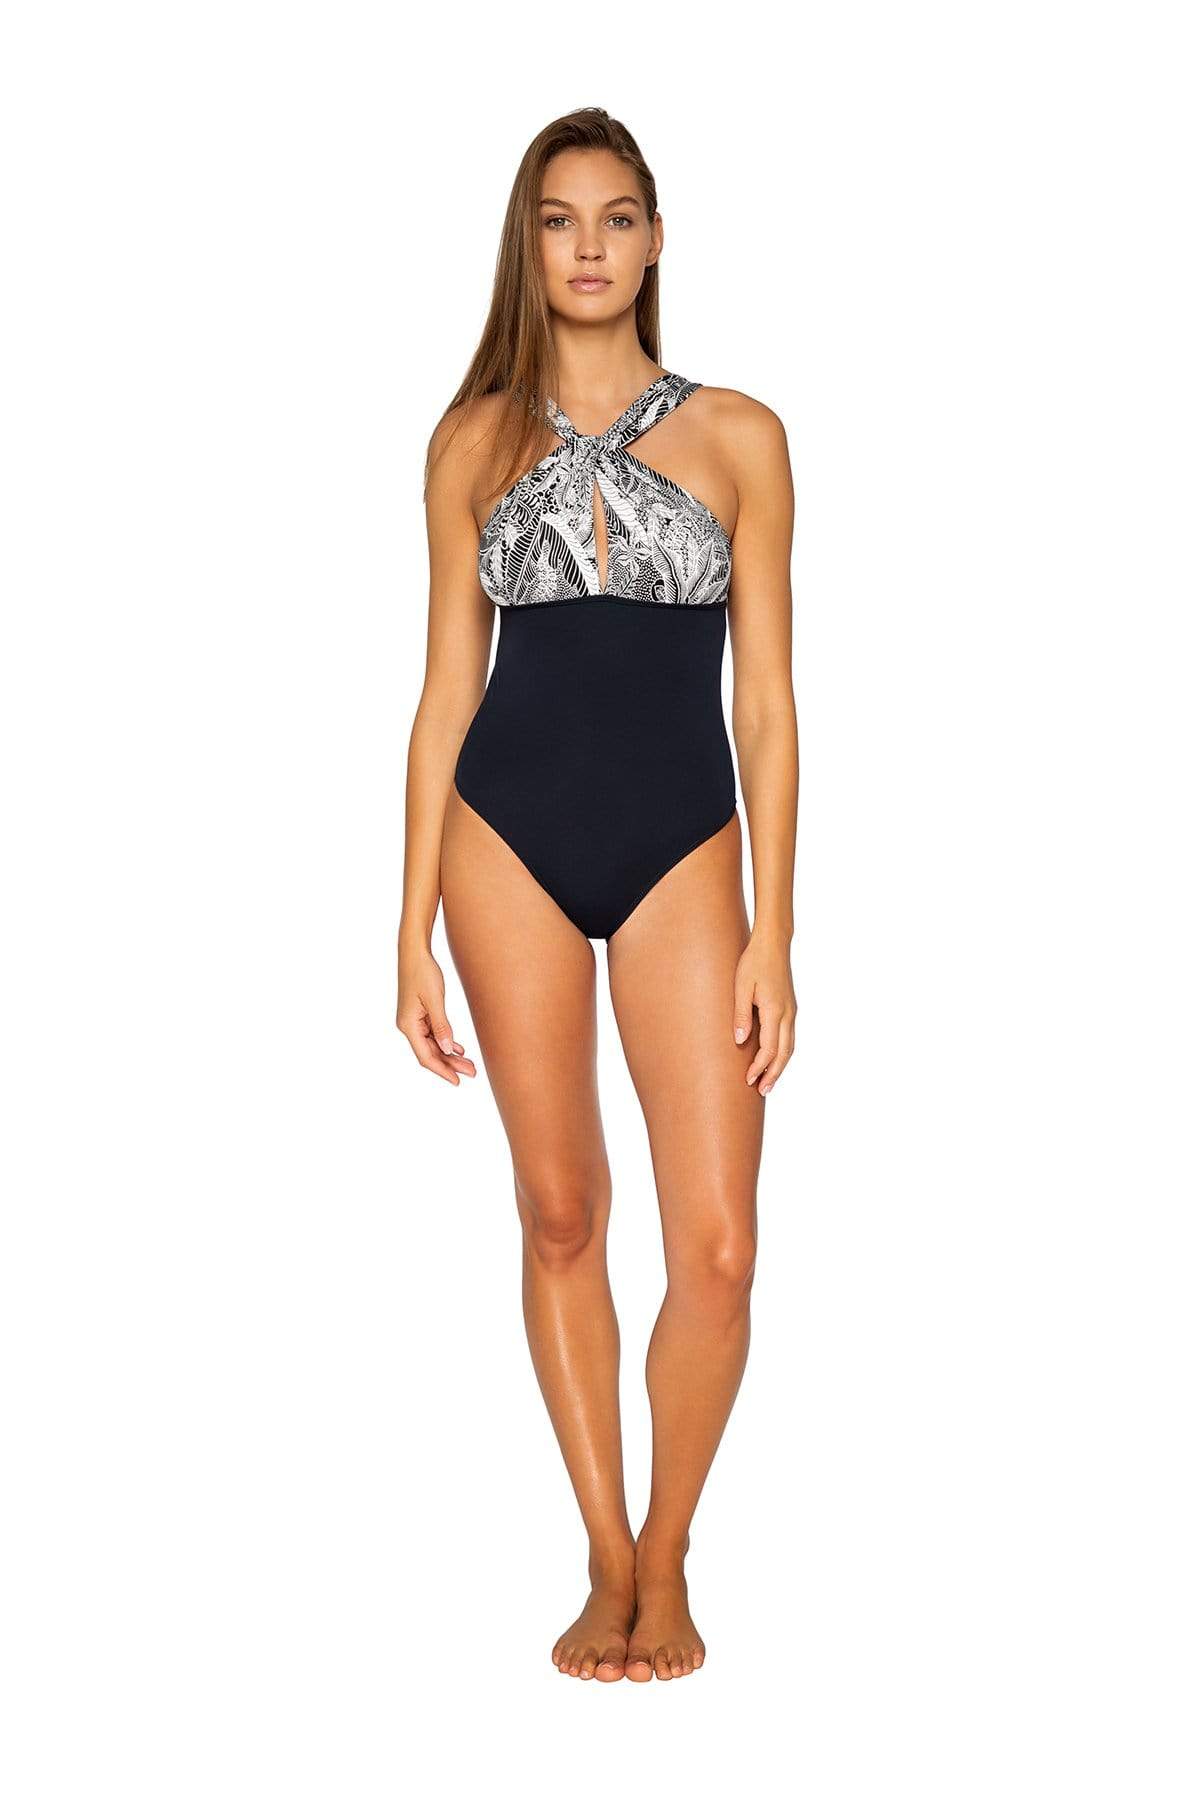 Bestswimwear -  Sunsets South Pacific  Grace One Piece